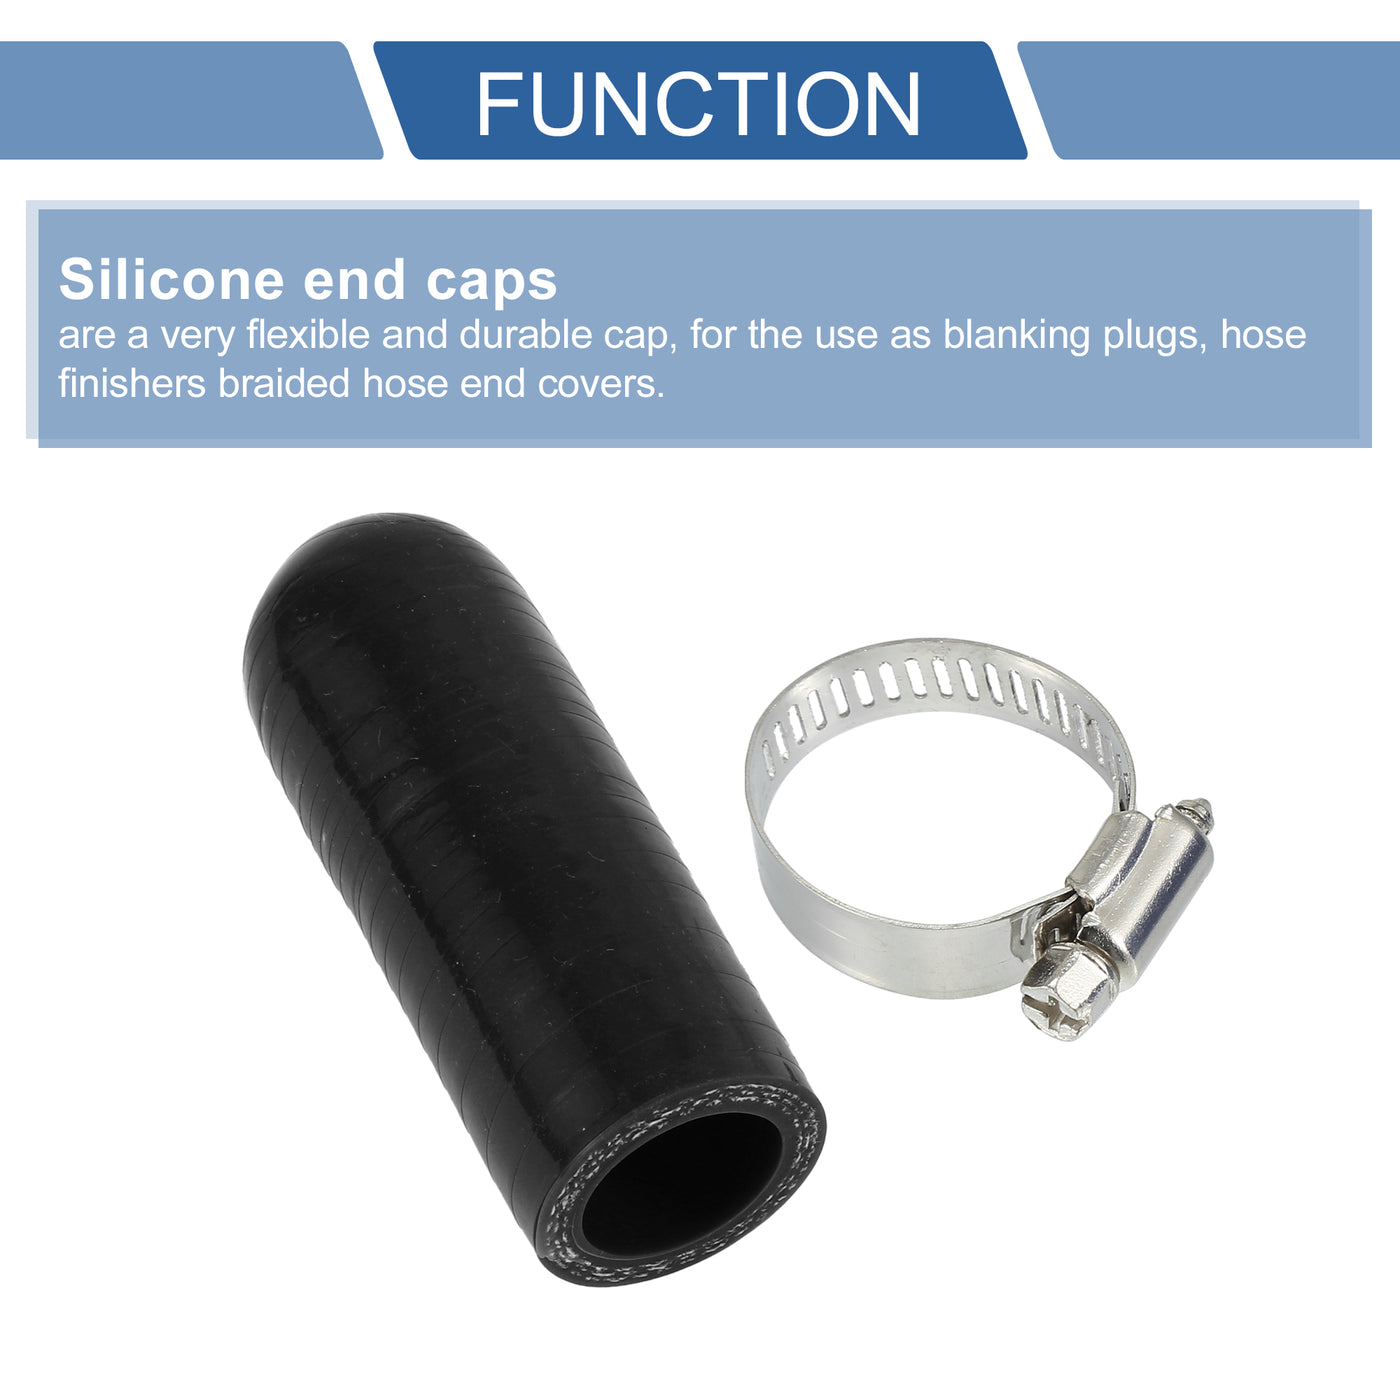 X AUTOHAUX 1 Pcs 60mm Length 20mm/0.79" ID Black Car Silicone Rubber Hose End Cap with Clamp Silicone Reinforced Blanking Cap for Bypass Tube Universal